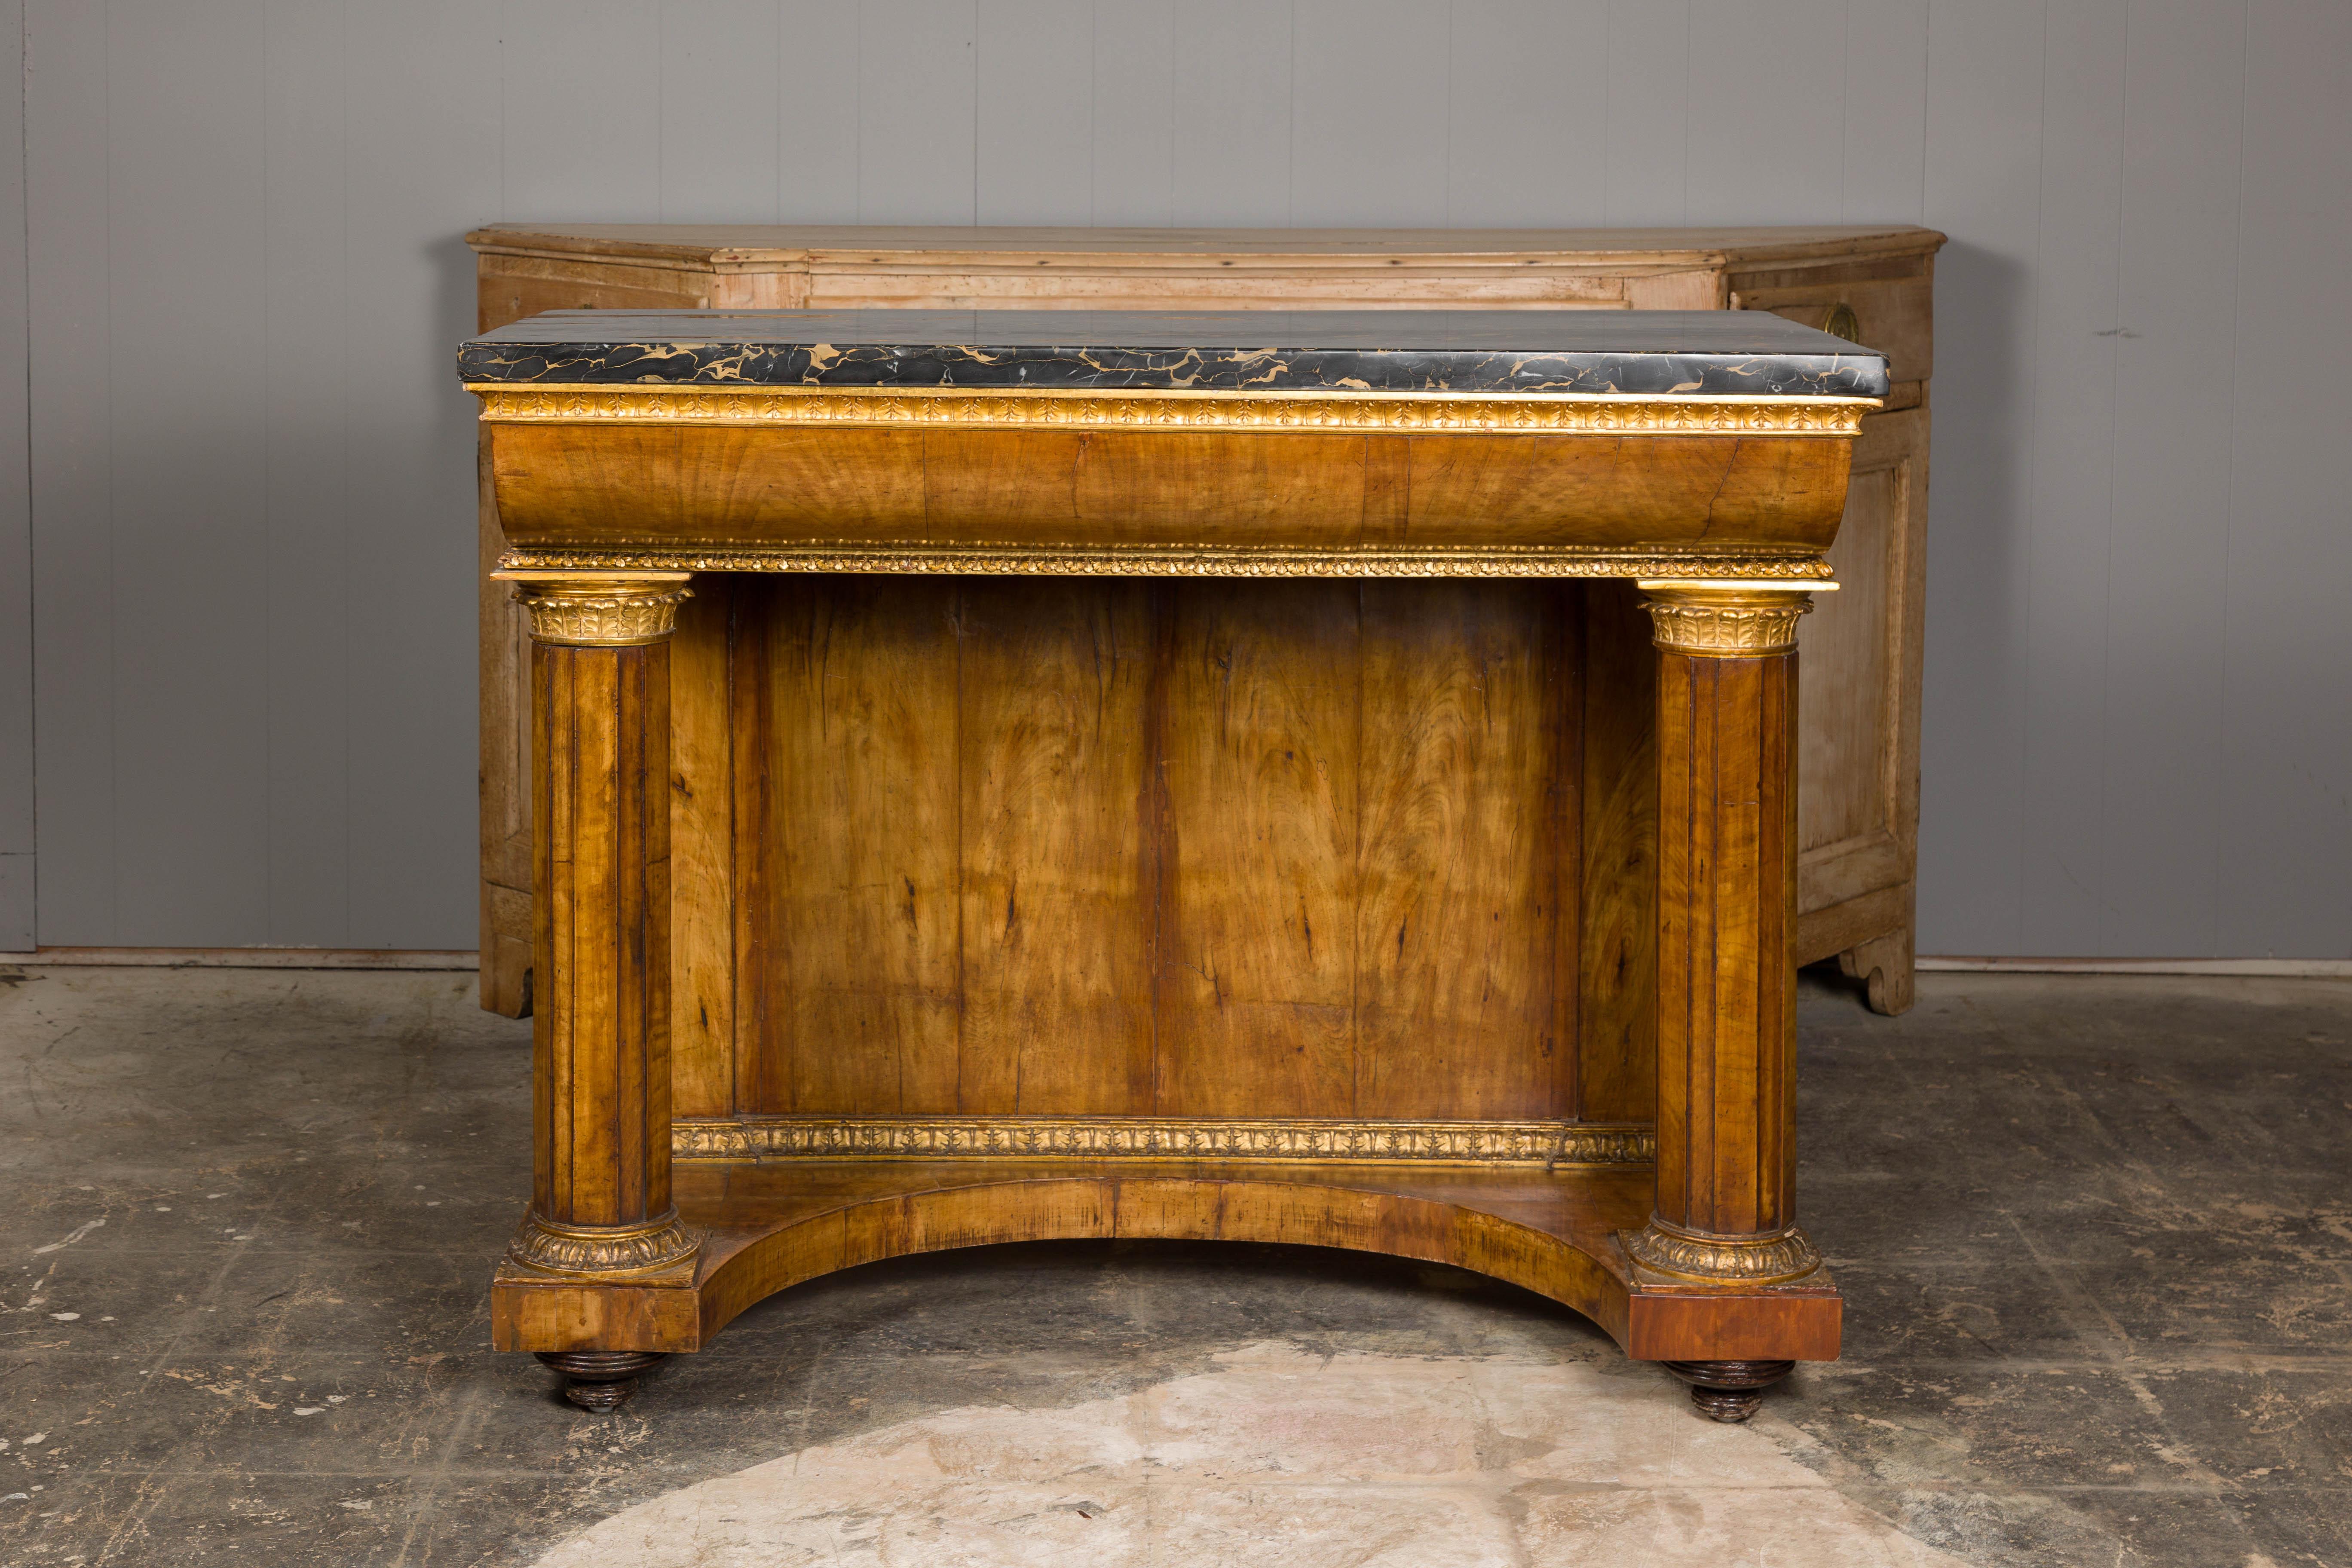 A French Napoléon III period walnut console table from circa 1860 with original marble top and carved gilt accents. This French Napoléon III period console table, dating back to around 1860, is a masterpiece of timeless elegance and intricate